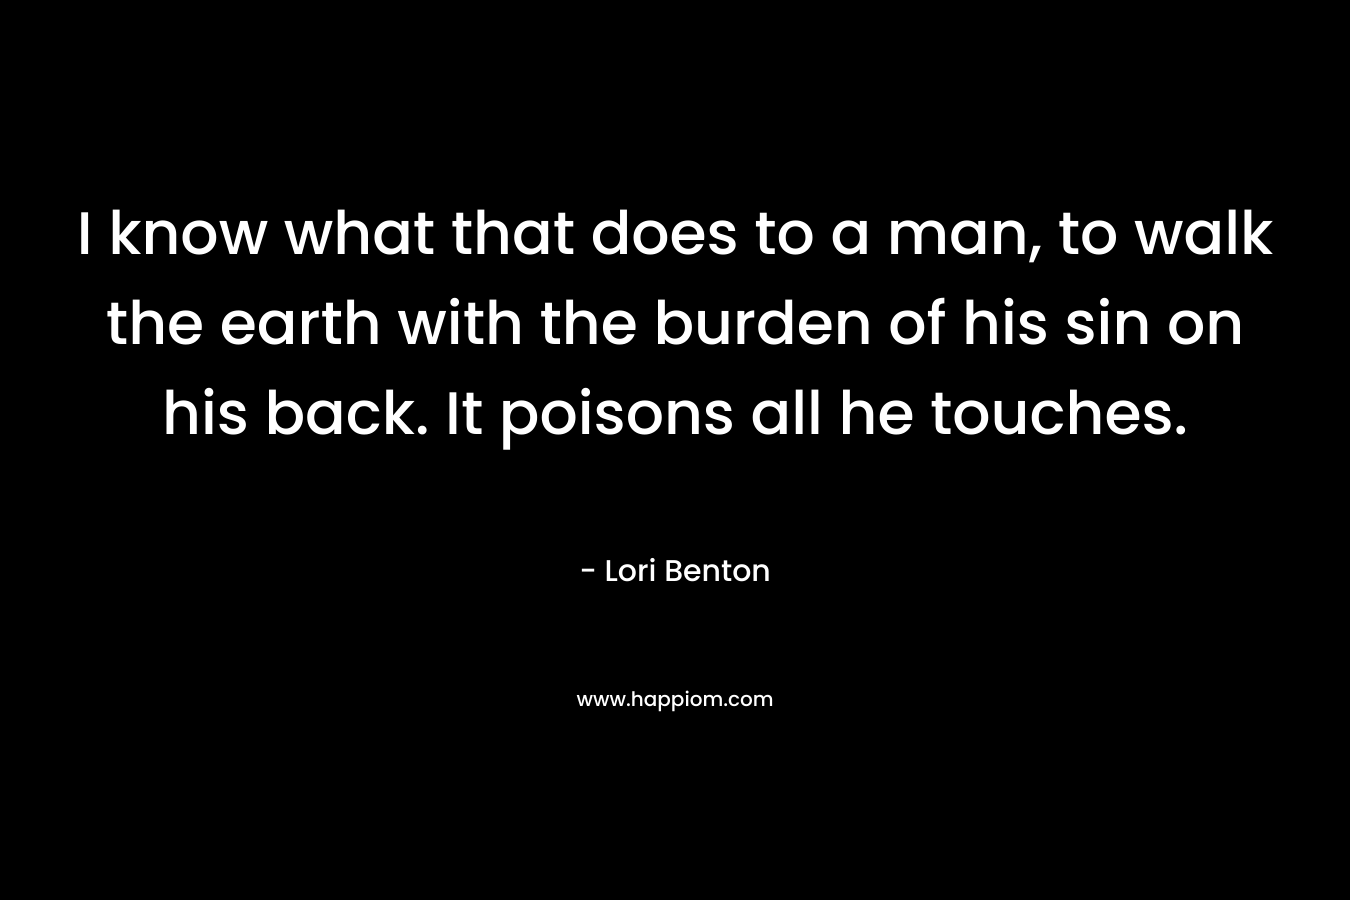 I know what that does to a man, to walk the earth with the burden of his sin on his back. It poisons all he touches. – Lori Benton